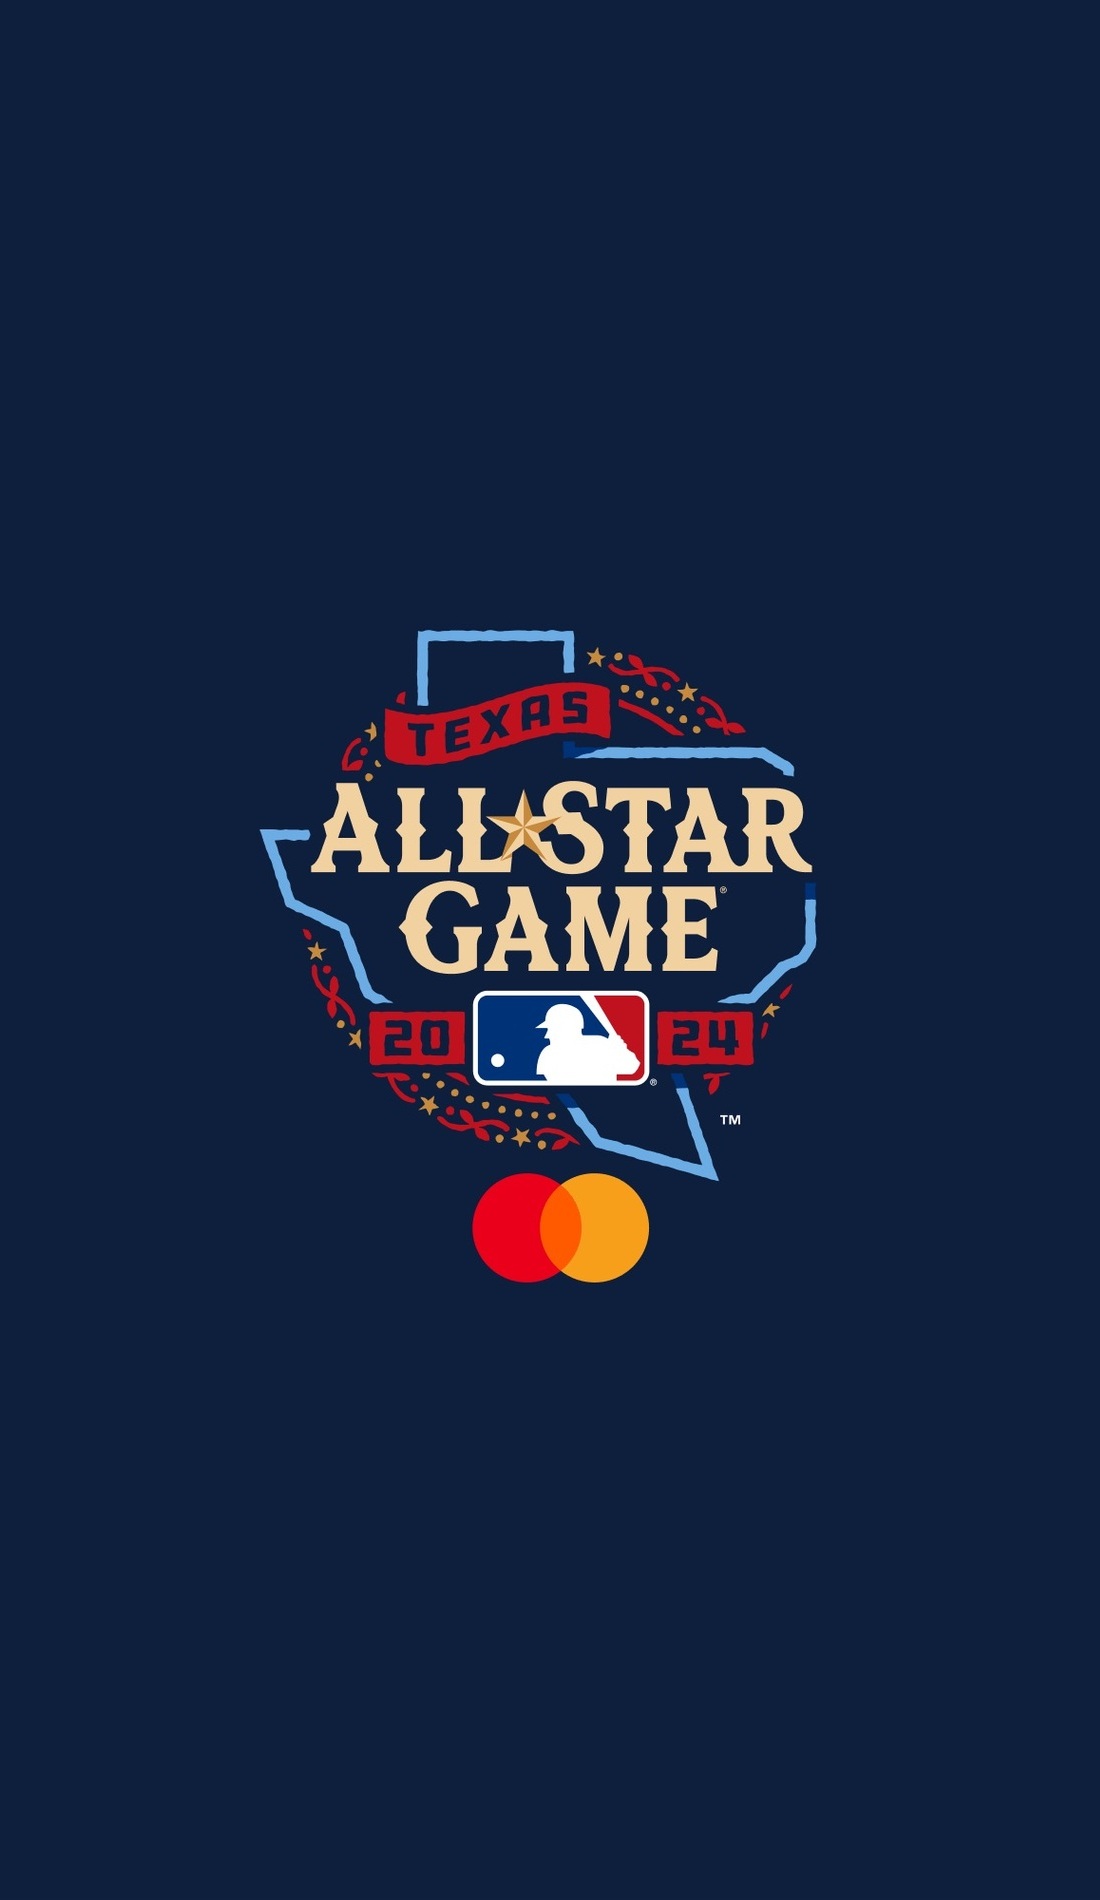 A MLB All-Star Game live event